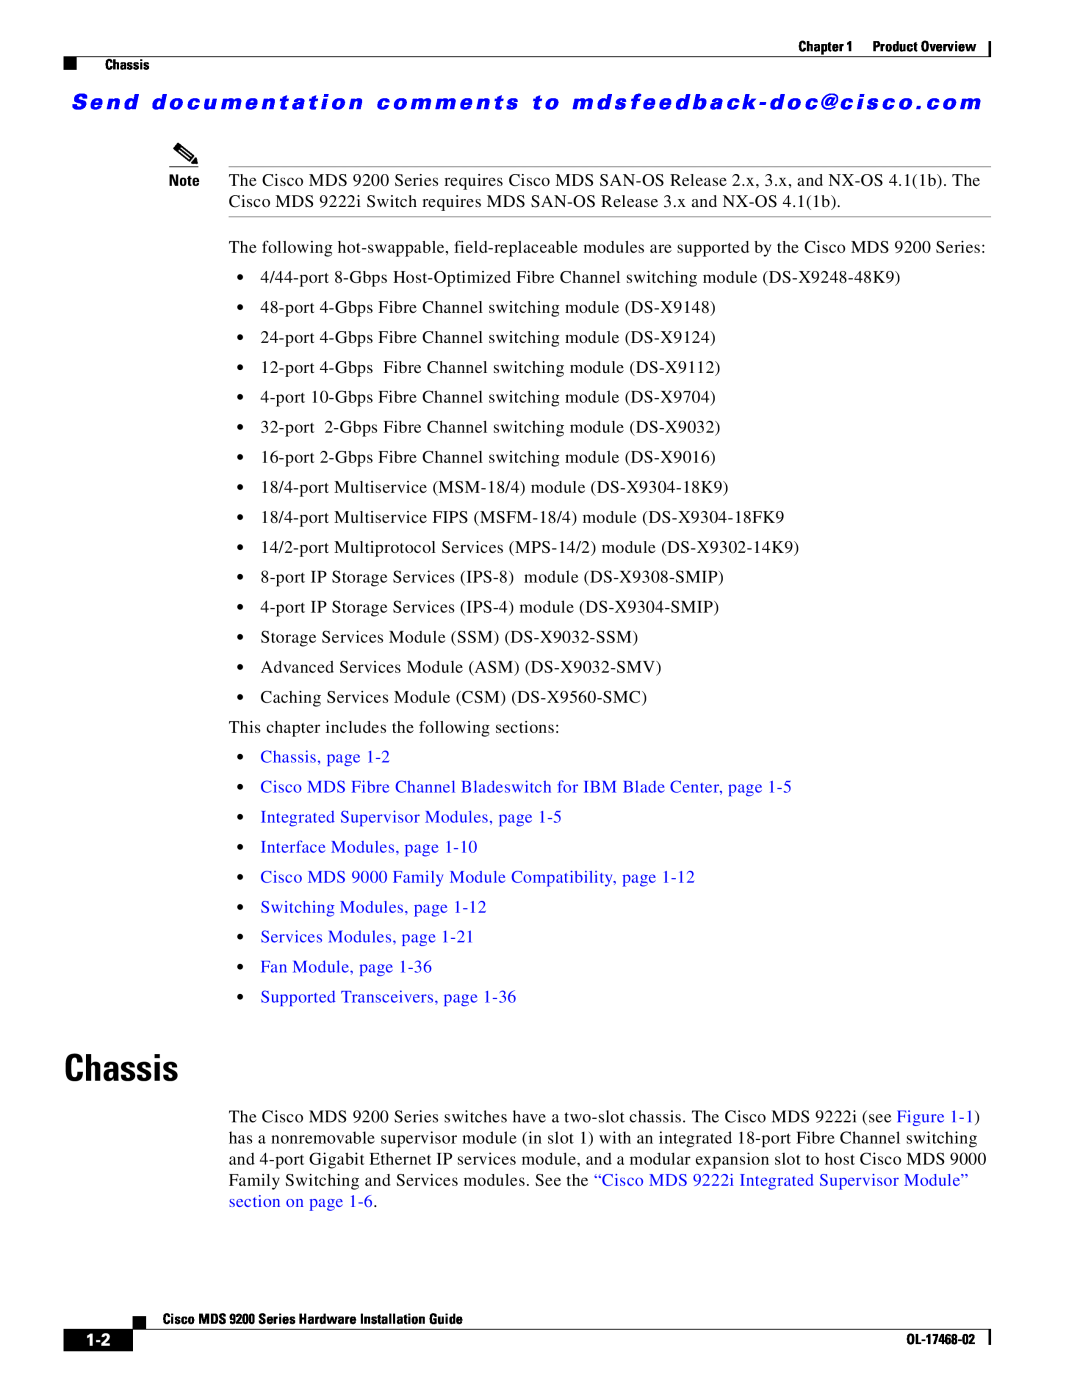 Cisco Systems MDS 9200 Series manual Chassis, page, Cisco MDS Fibre Channel Bladeswitch for IBM Blade Center, page 